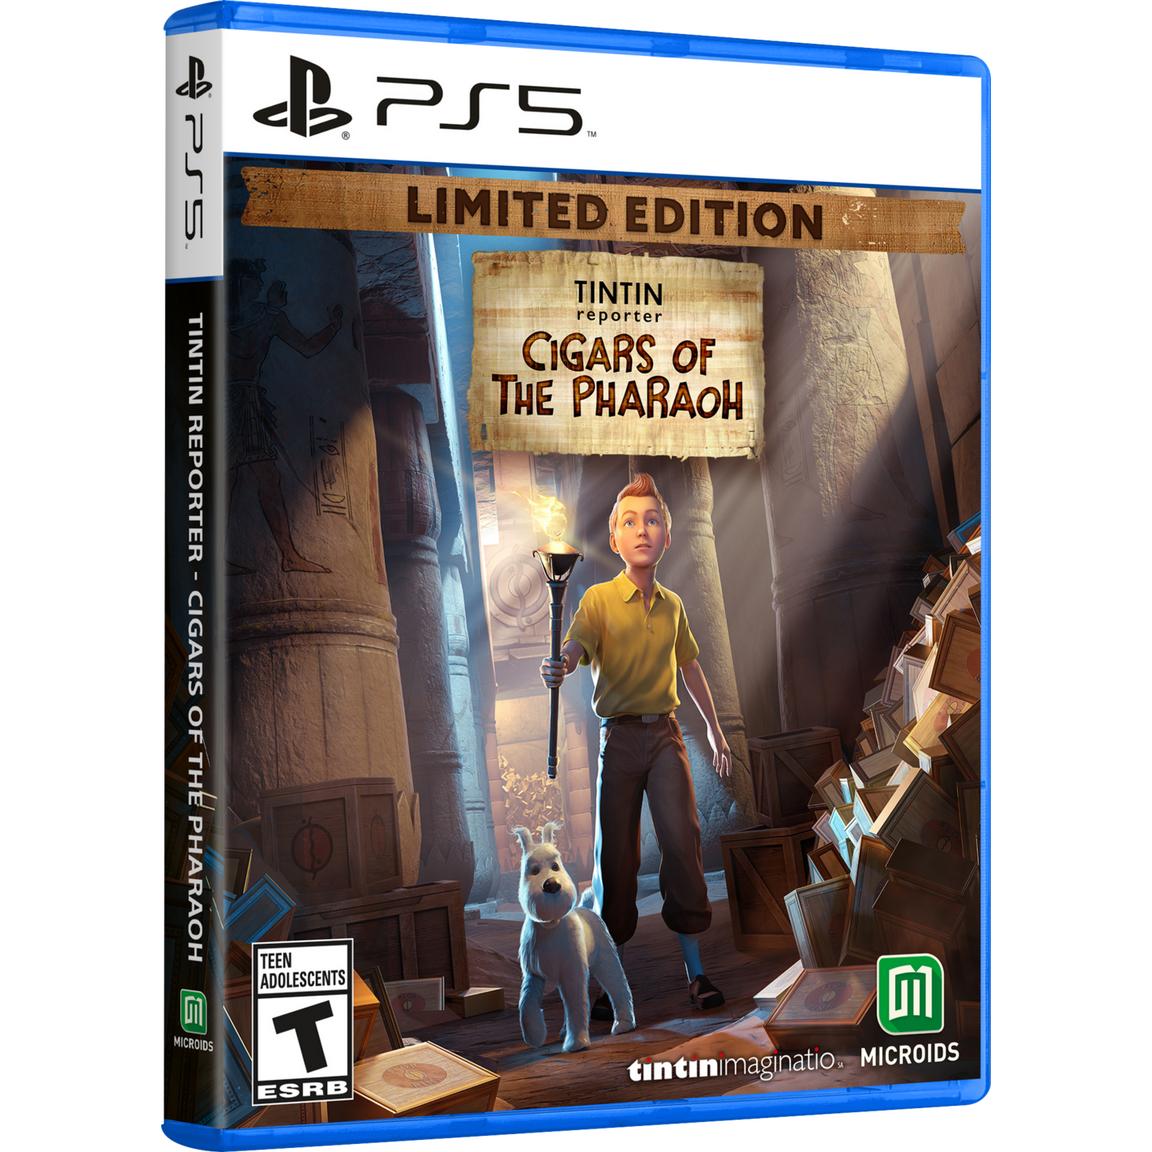 Видеоигра Tintin Reporter: Cigars of the Pharaoh Limited Edition - PlayStation 5 ps5 игра microids tintin reporter cigars of the pharaoh ли